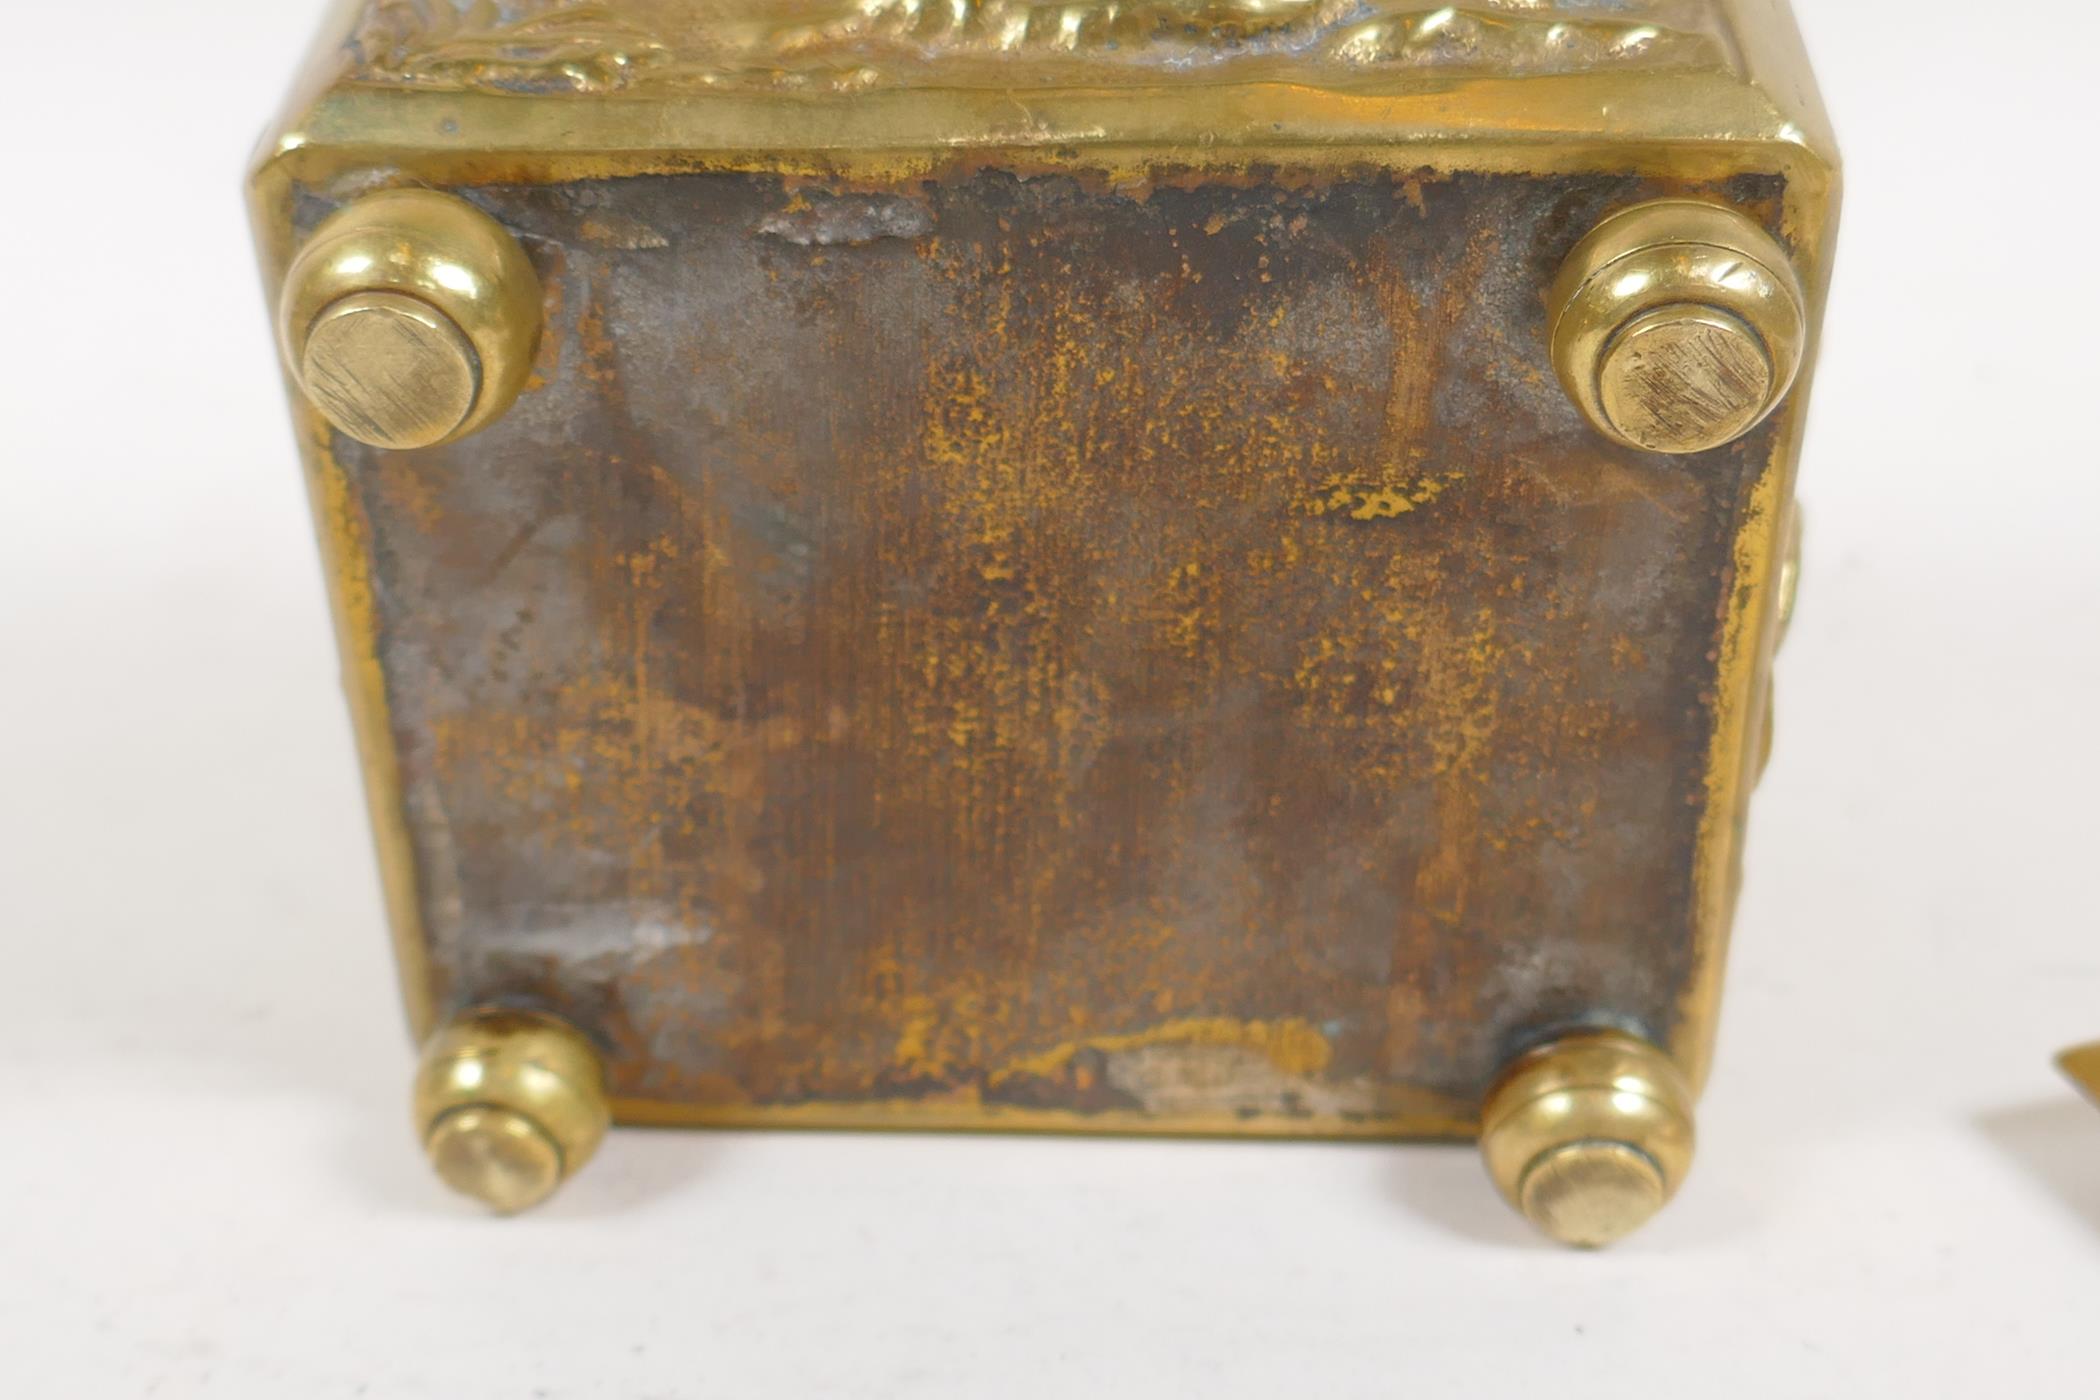 A late C18th/early C19th Dutch brass tobacco box embossed with a scene of a travelling monkey - Image 4 of 4